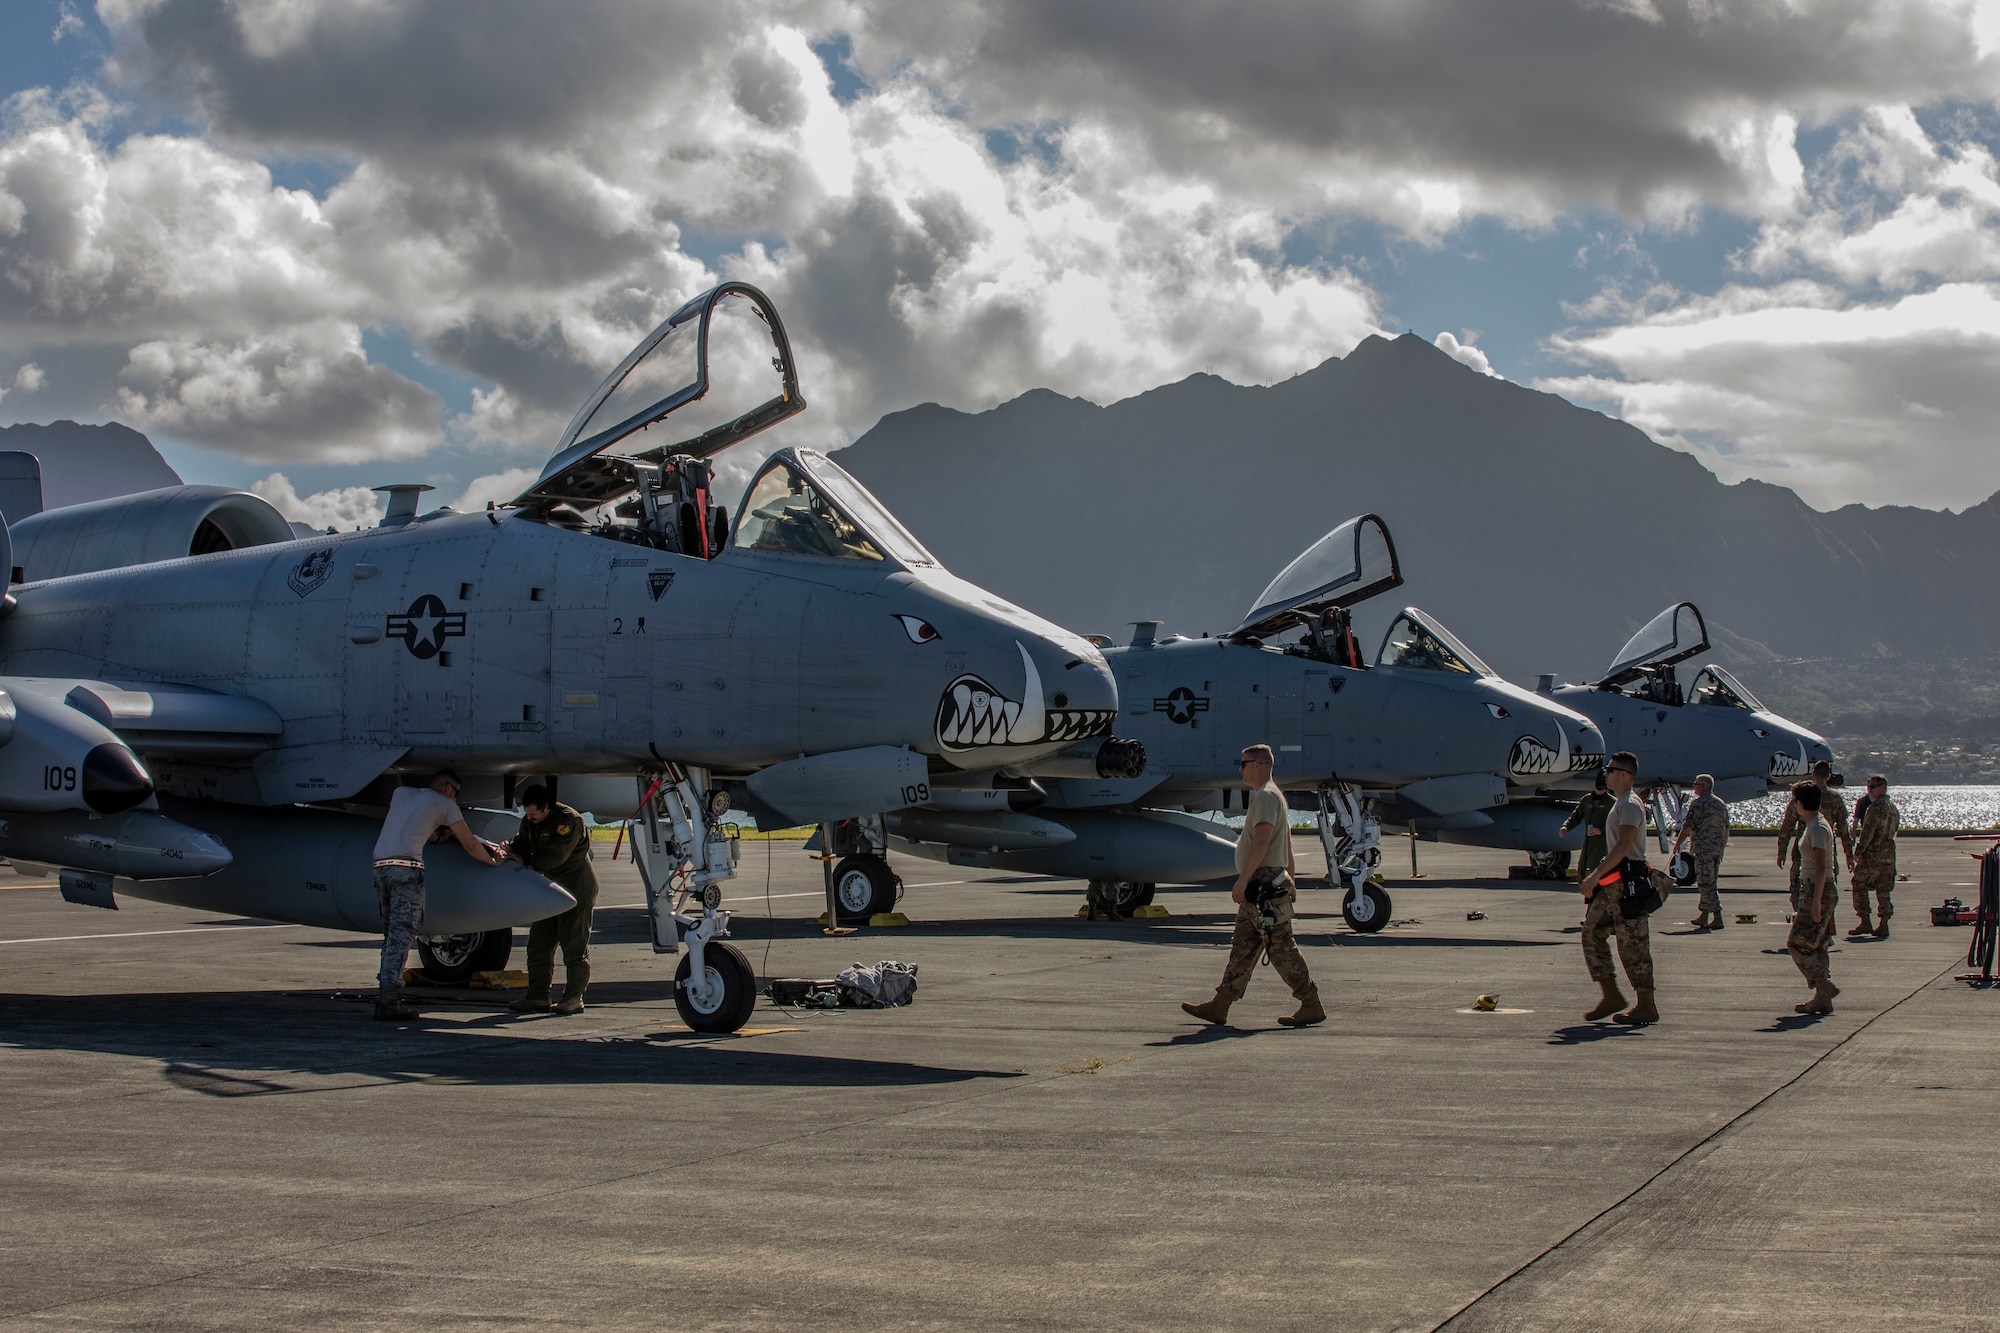 U.S. Airmen assigned to the 442nd Fighter Wing from Whiteman Air Force Base, Missouri, secure and prepare A-10 Thunderbolt II aircraft after arriving aboard Marine Corps Air Station Kaneohe Bay, Marine Corps Base Hawaii, Feb. 11, 2019.